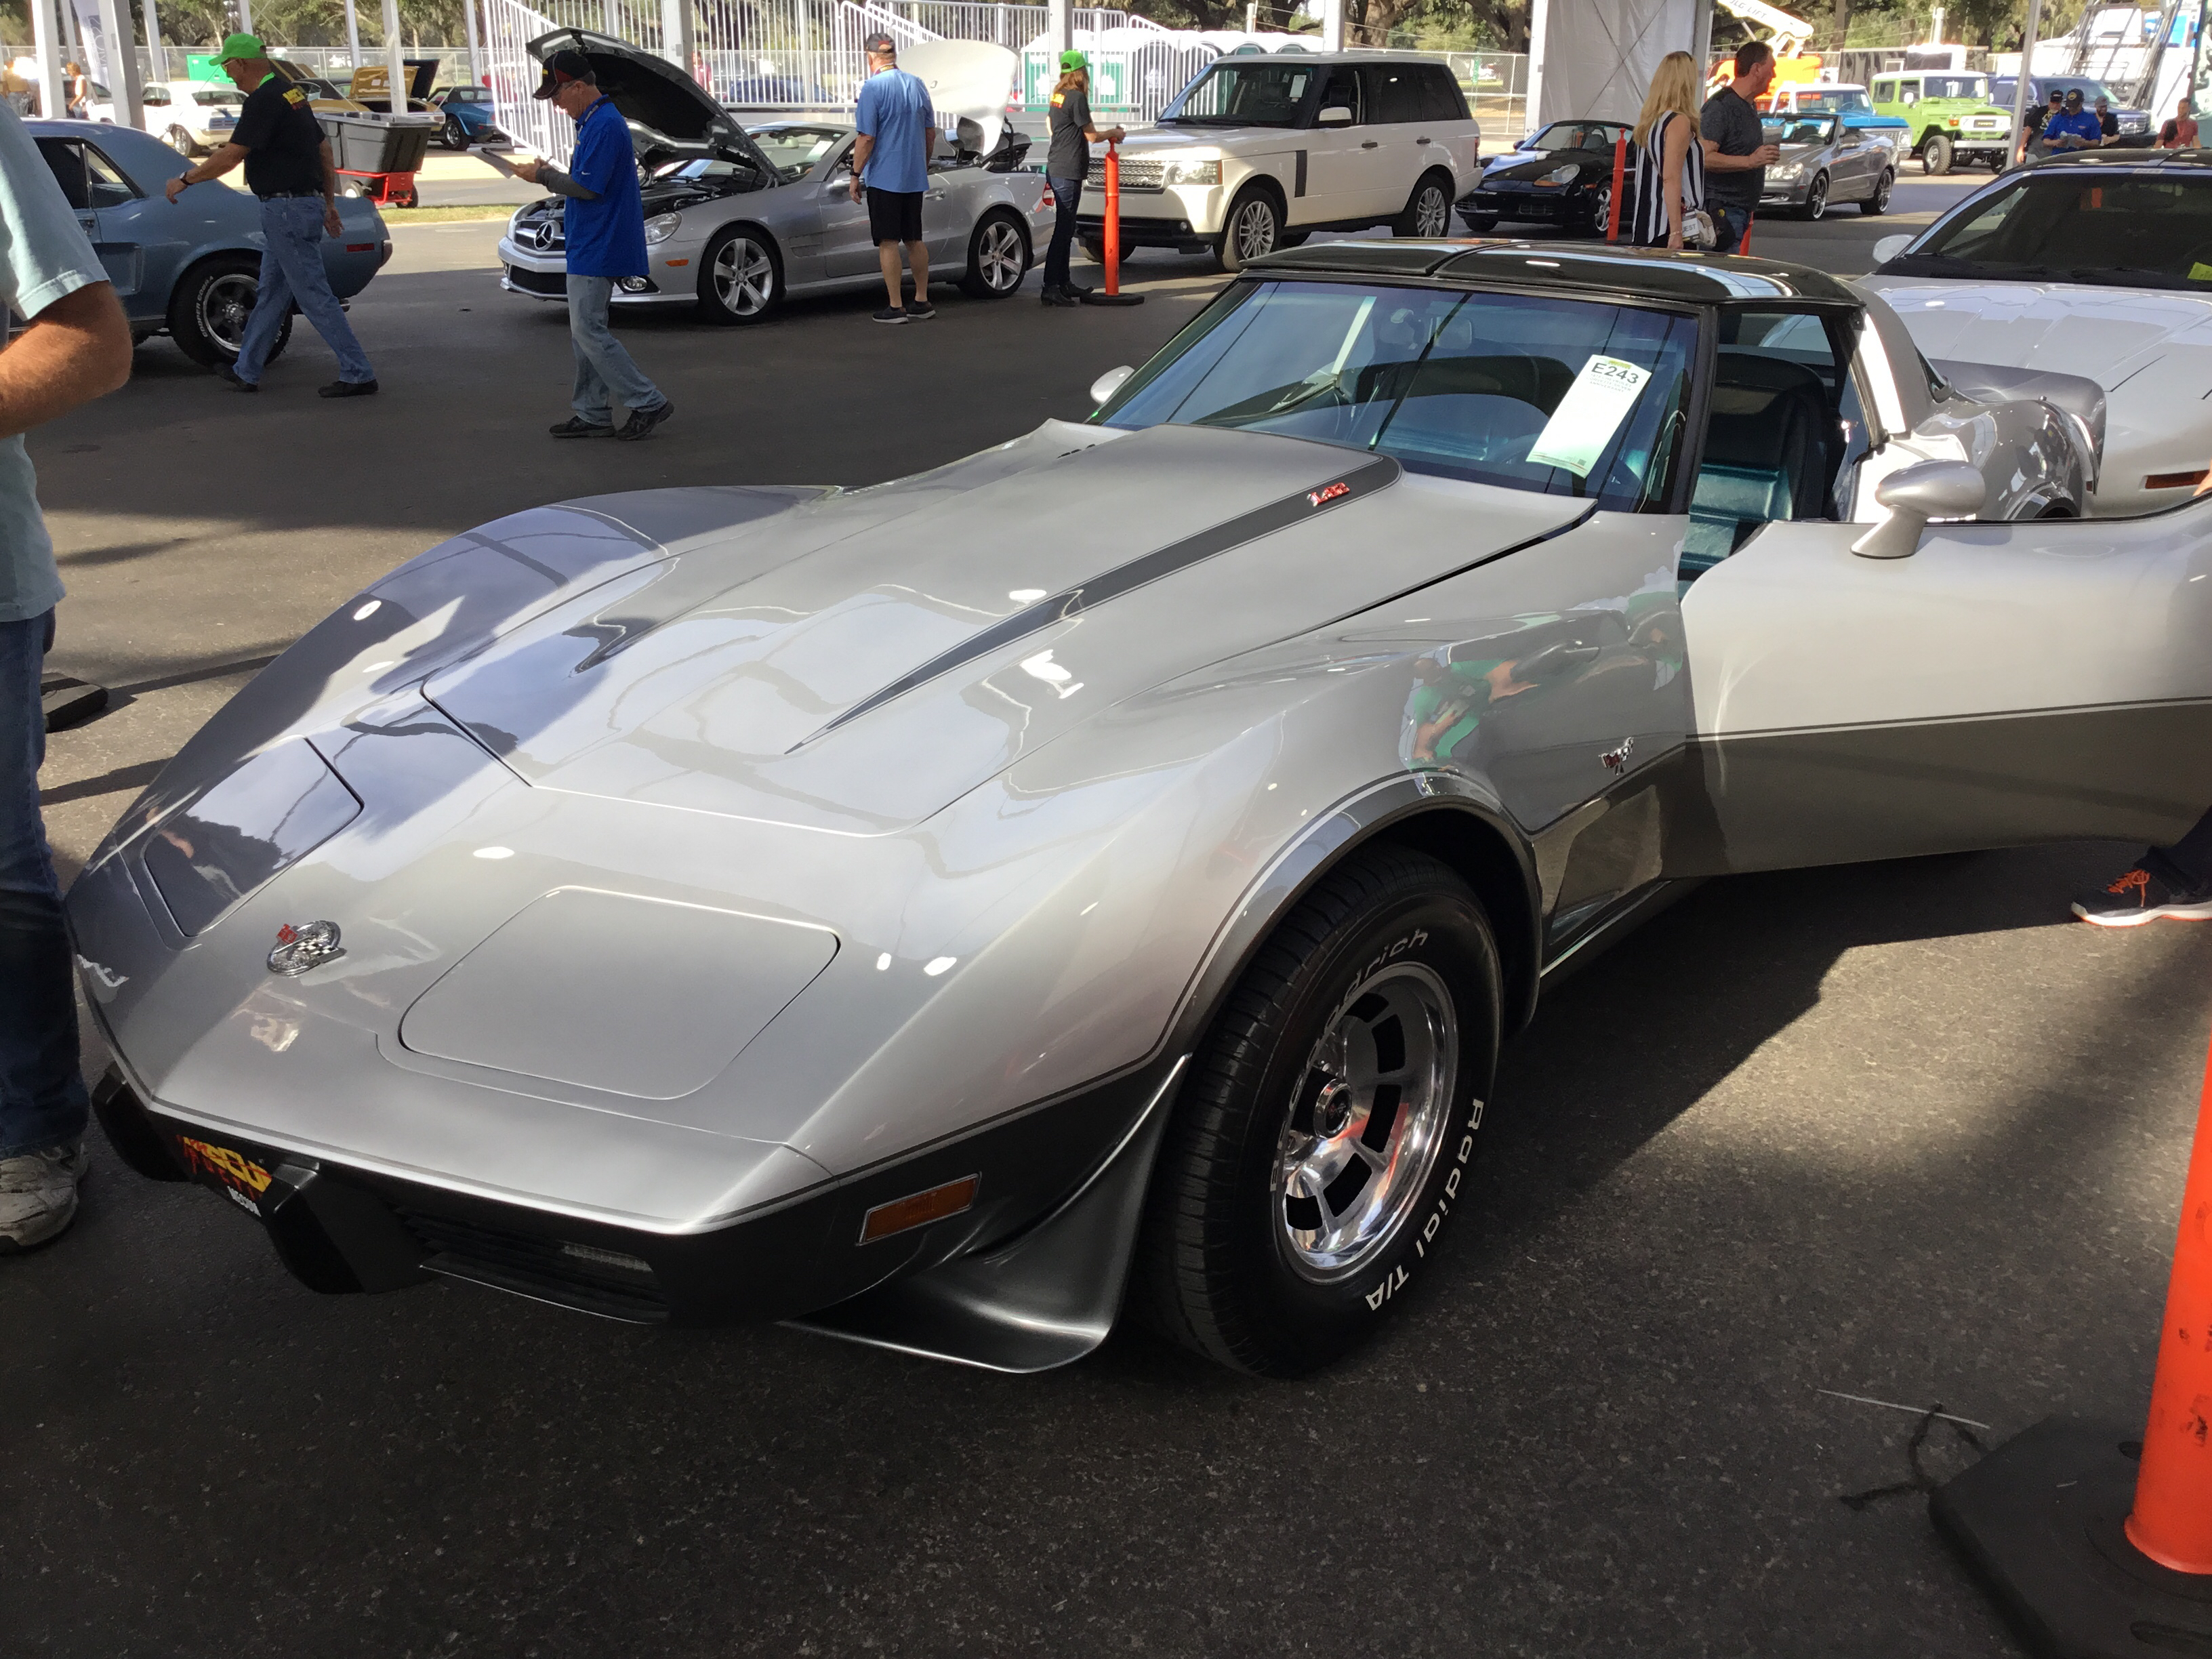 1978 Chevrolet Corvette Values Hagerty Valuation Tool